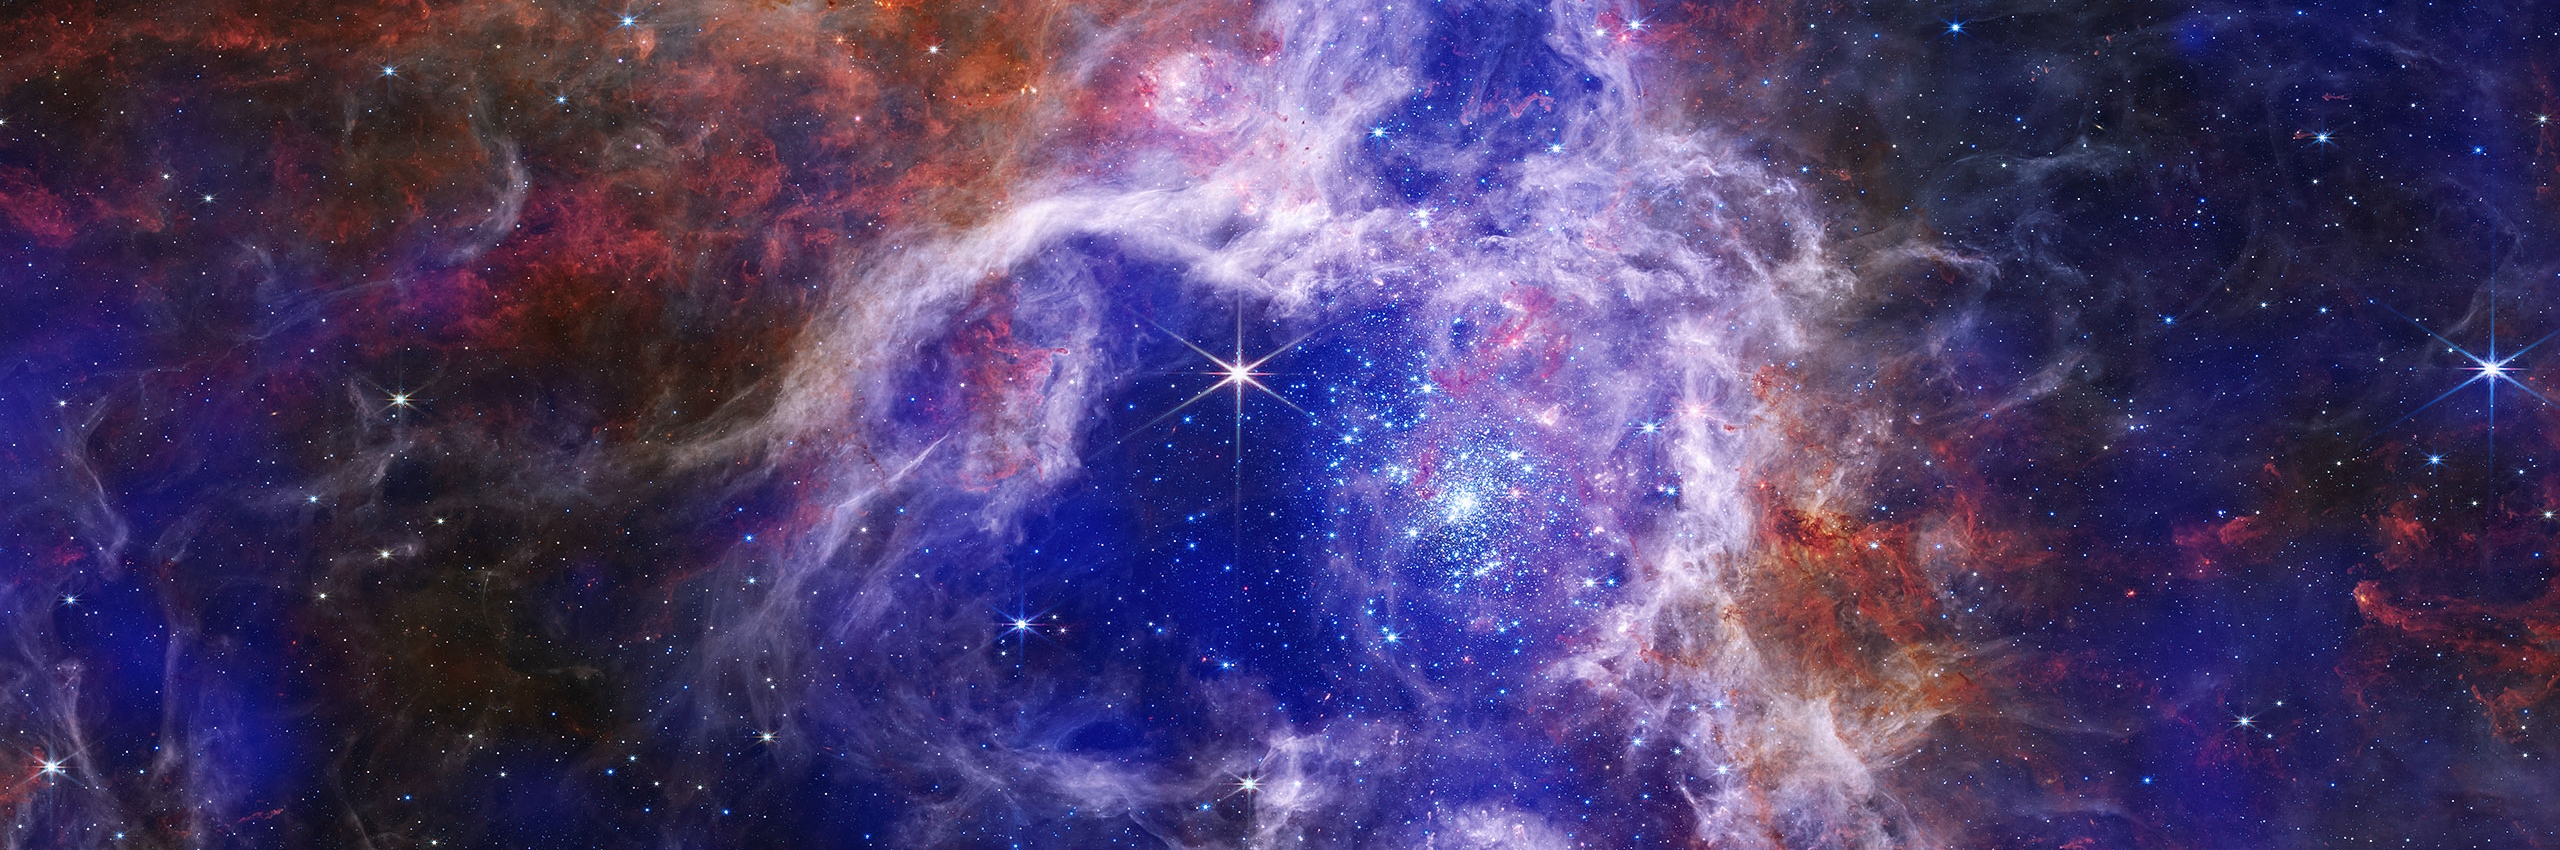 view of stars in space with swirling blue and red colors